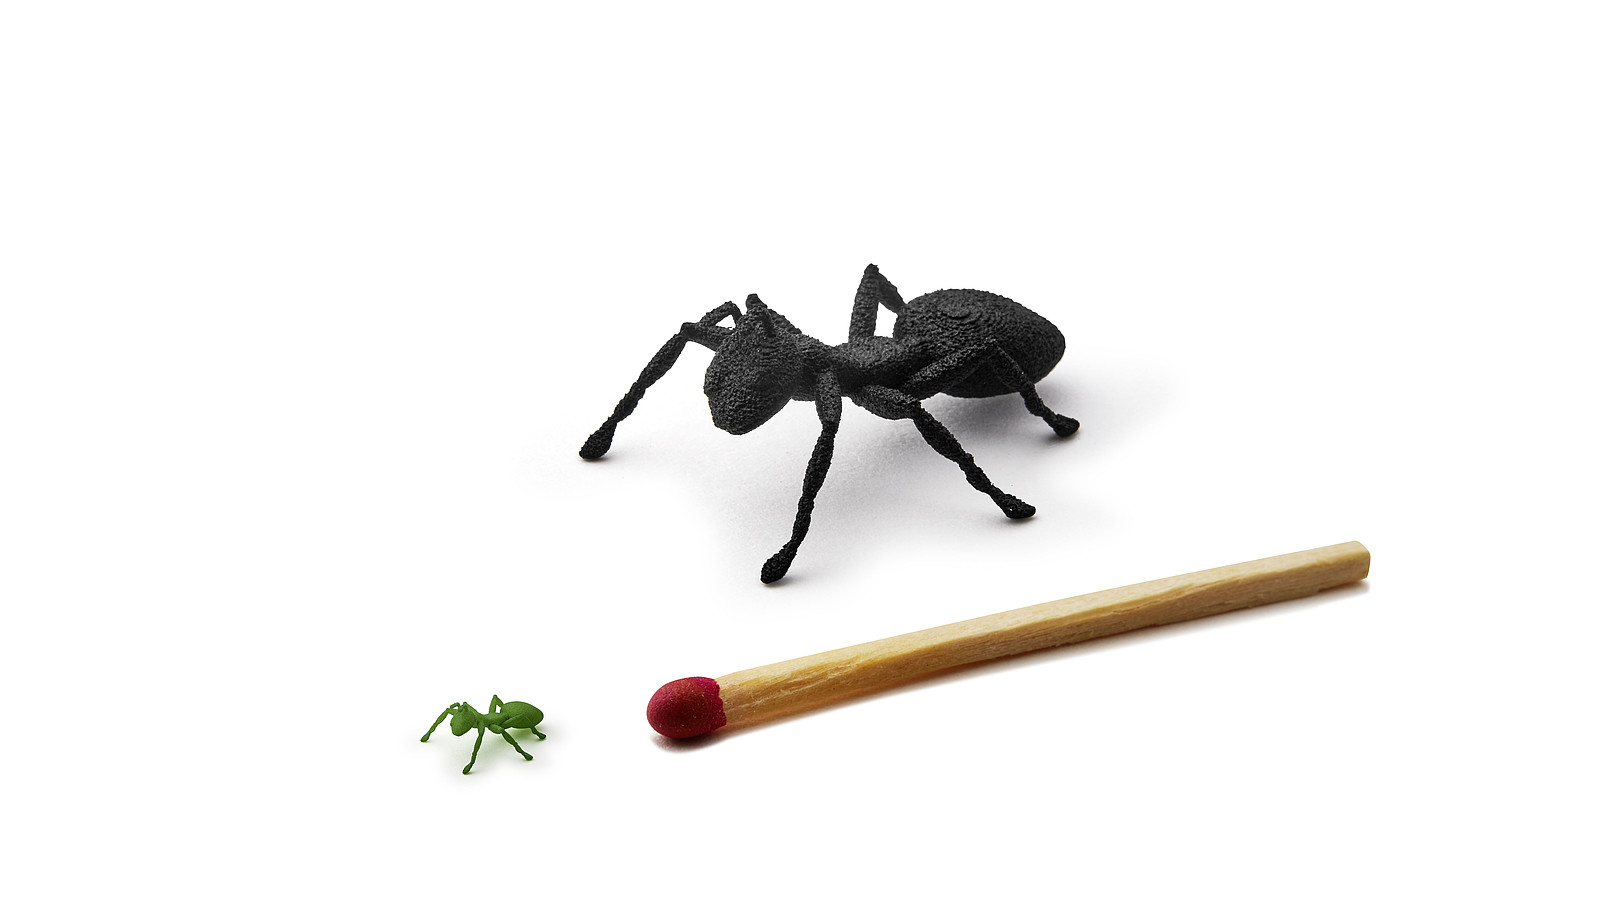 The picture illustrates what is possible with FDR technology using an ant the size of a match head.